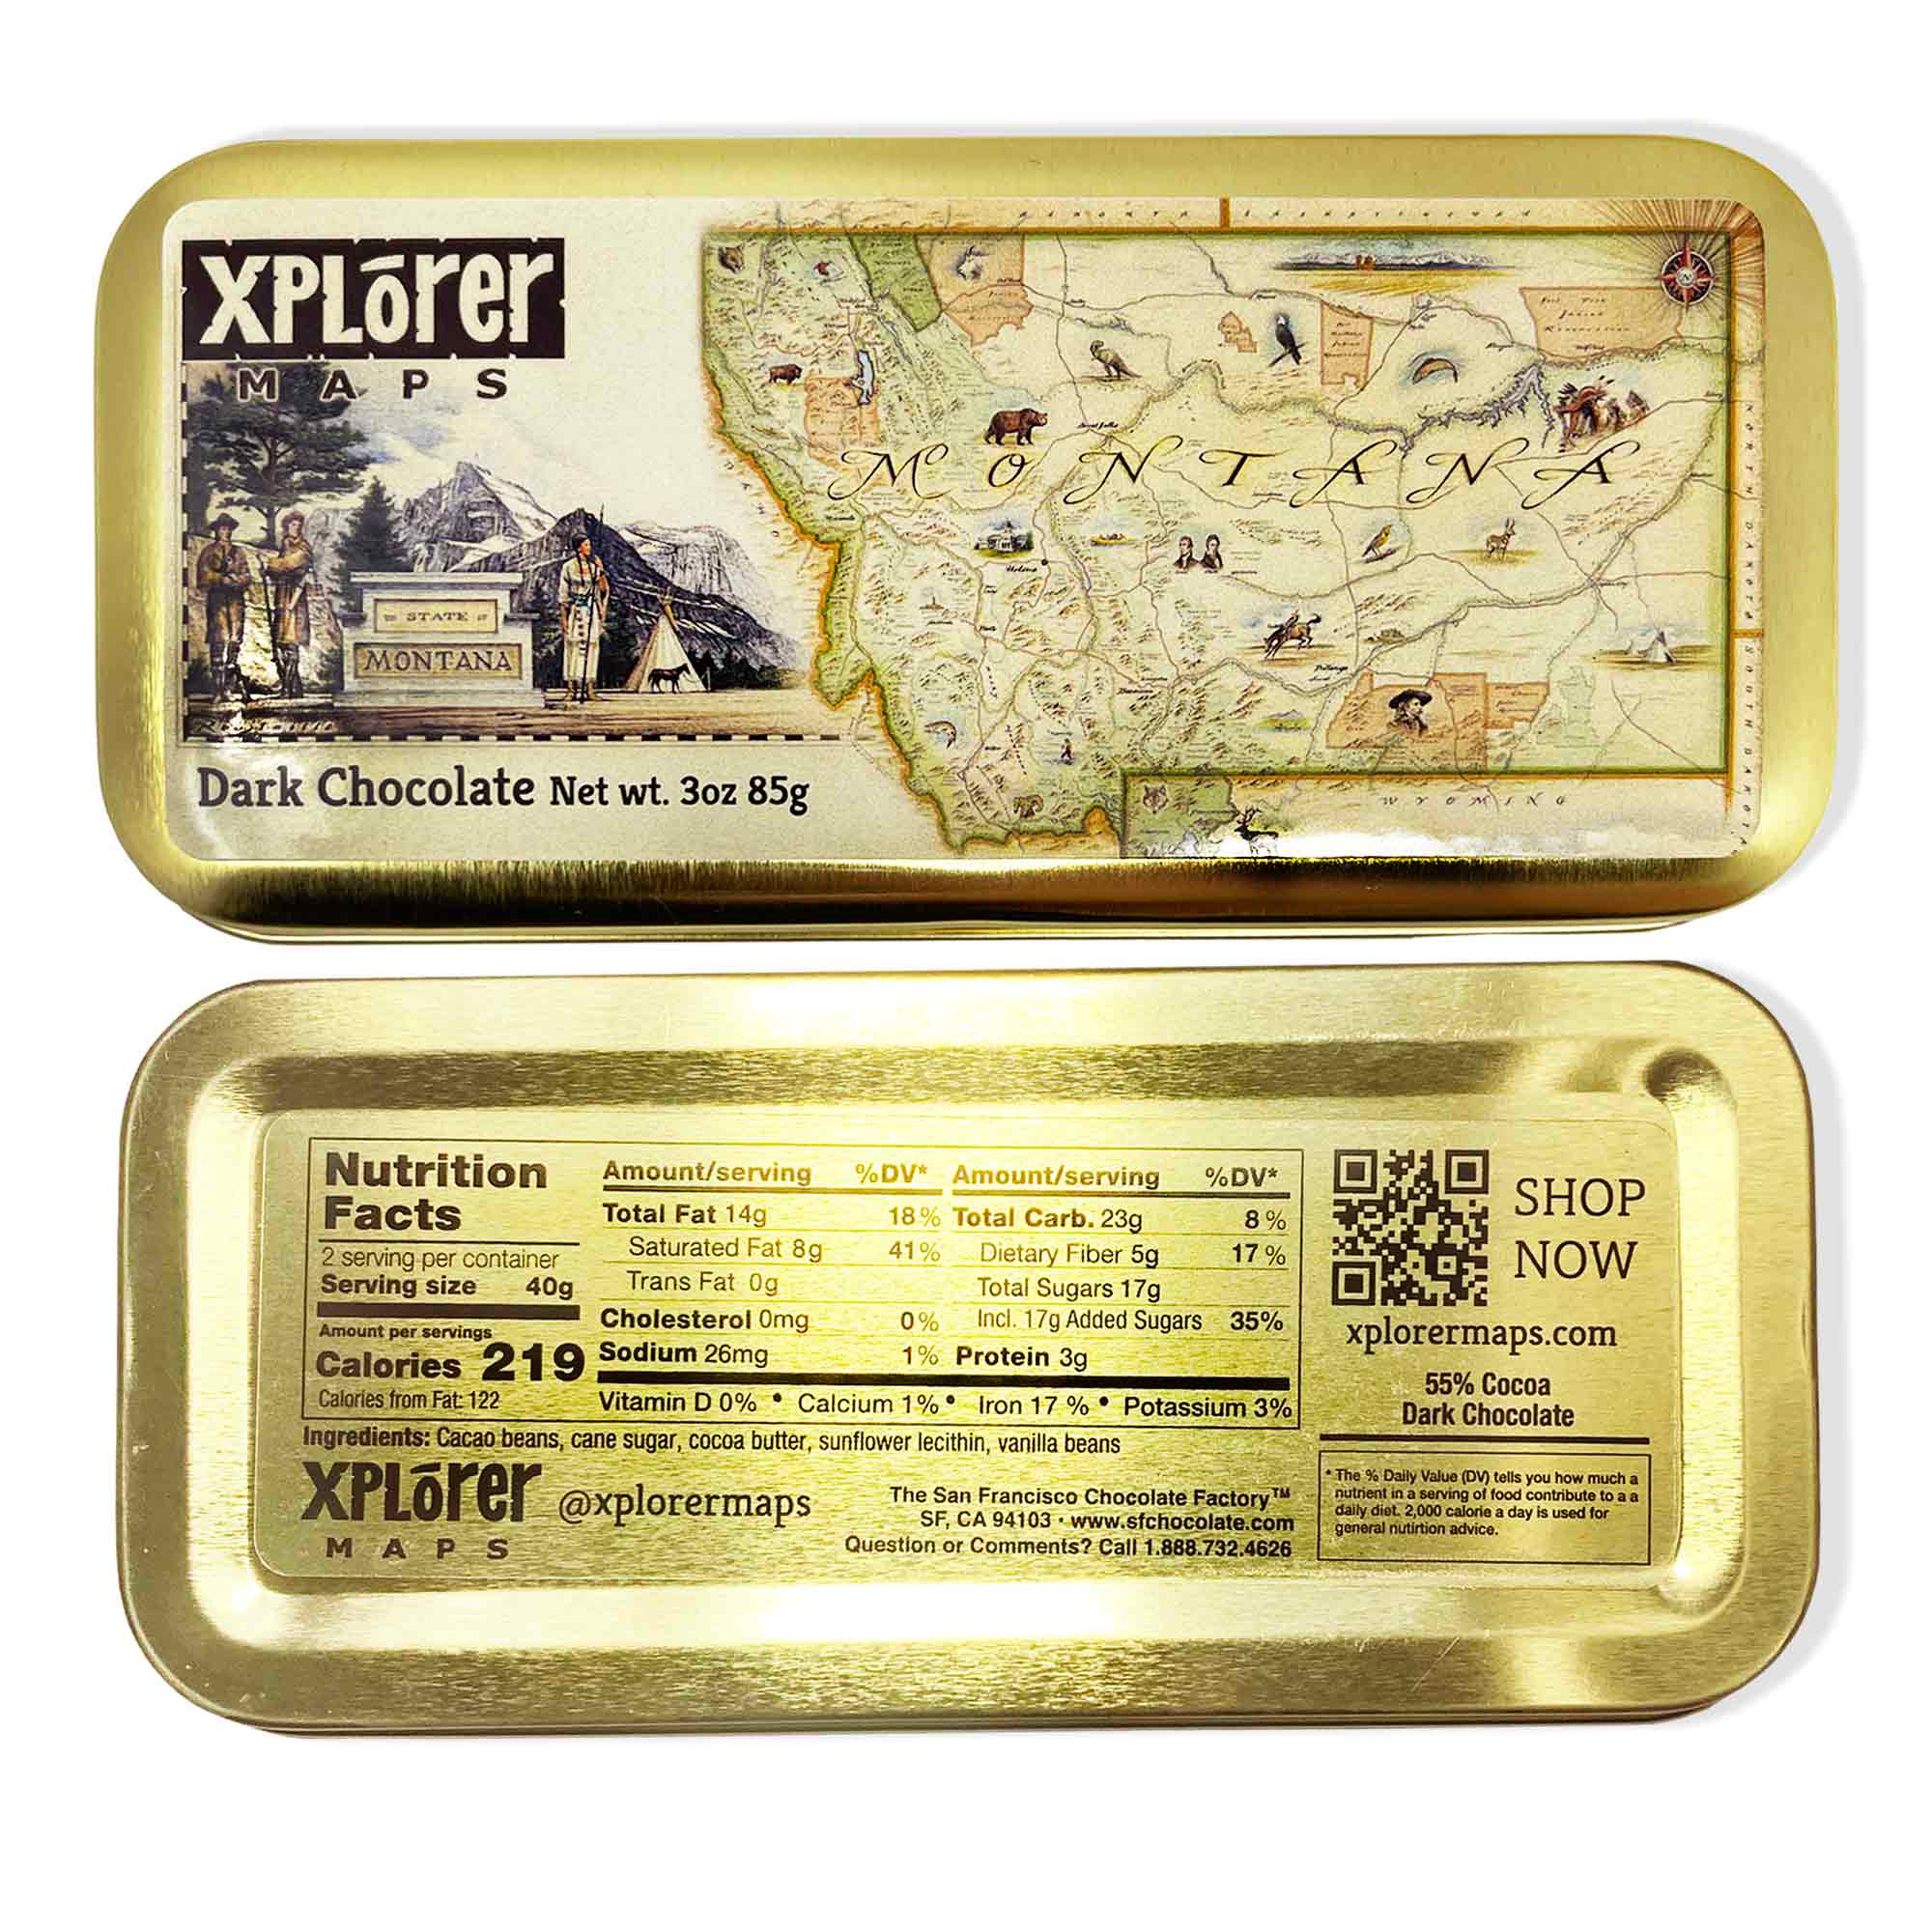 Xplorer Maps' Dark Chocolate with back side to see ingredients. 